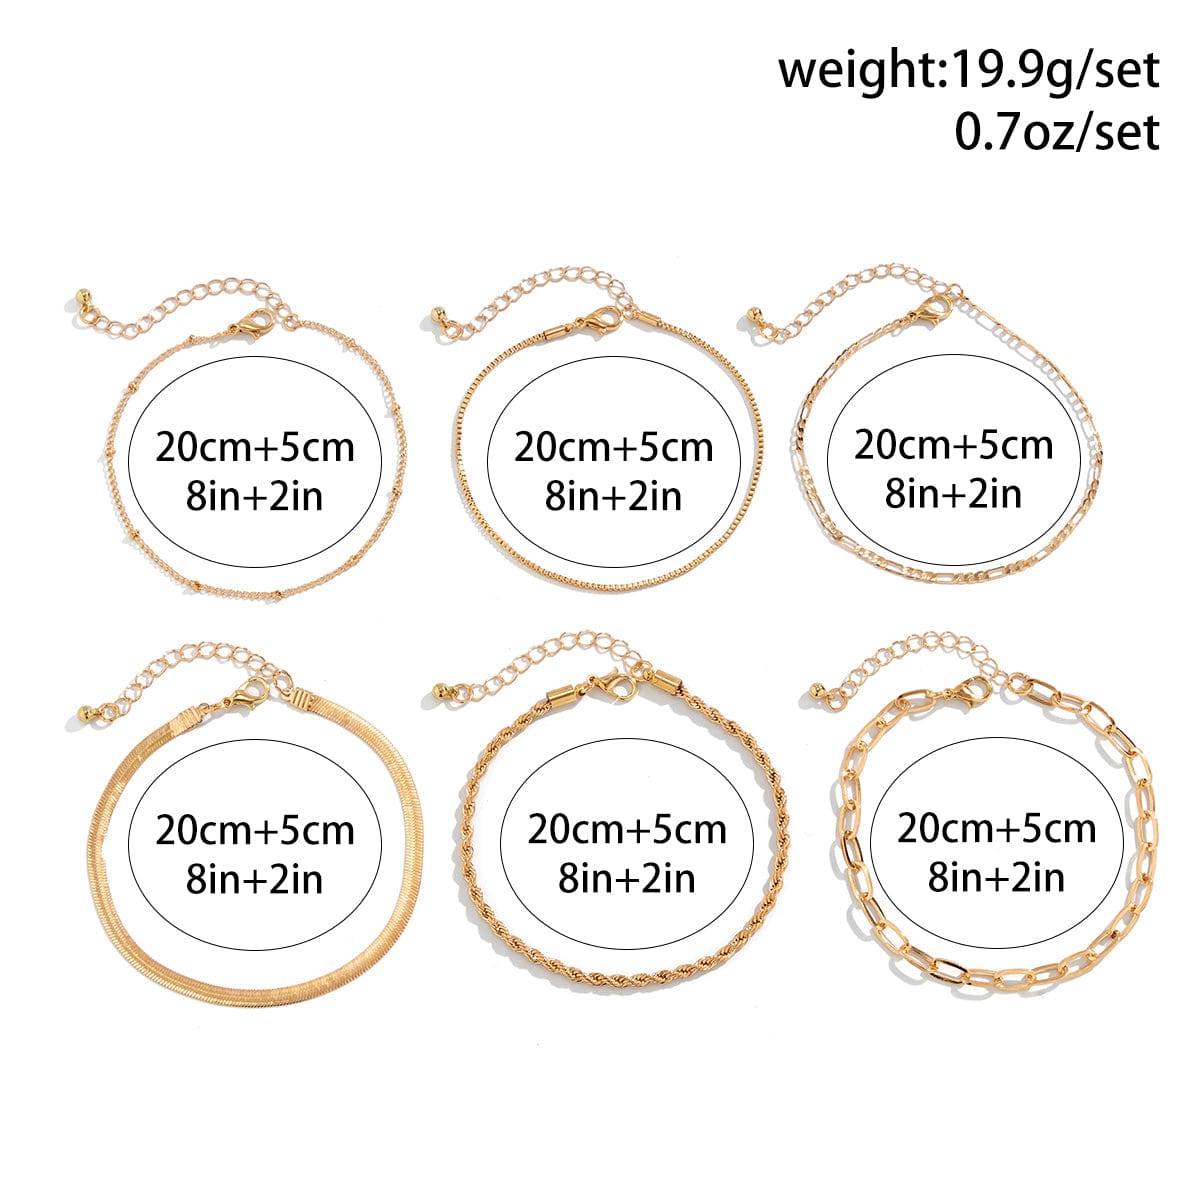 Boho Gold Plated Cable Chain Stackable Anklet Set - ArtGalleryZen